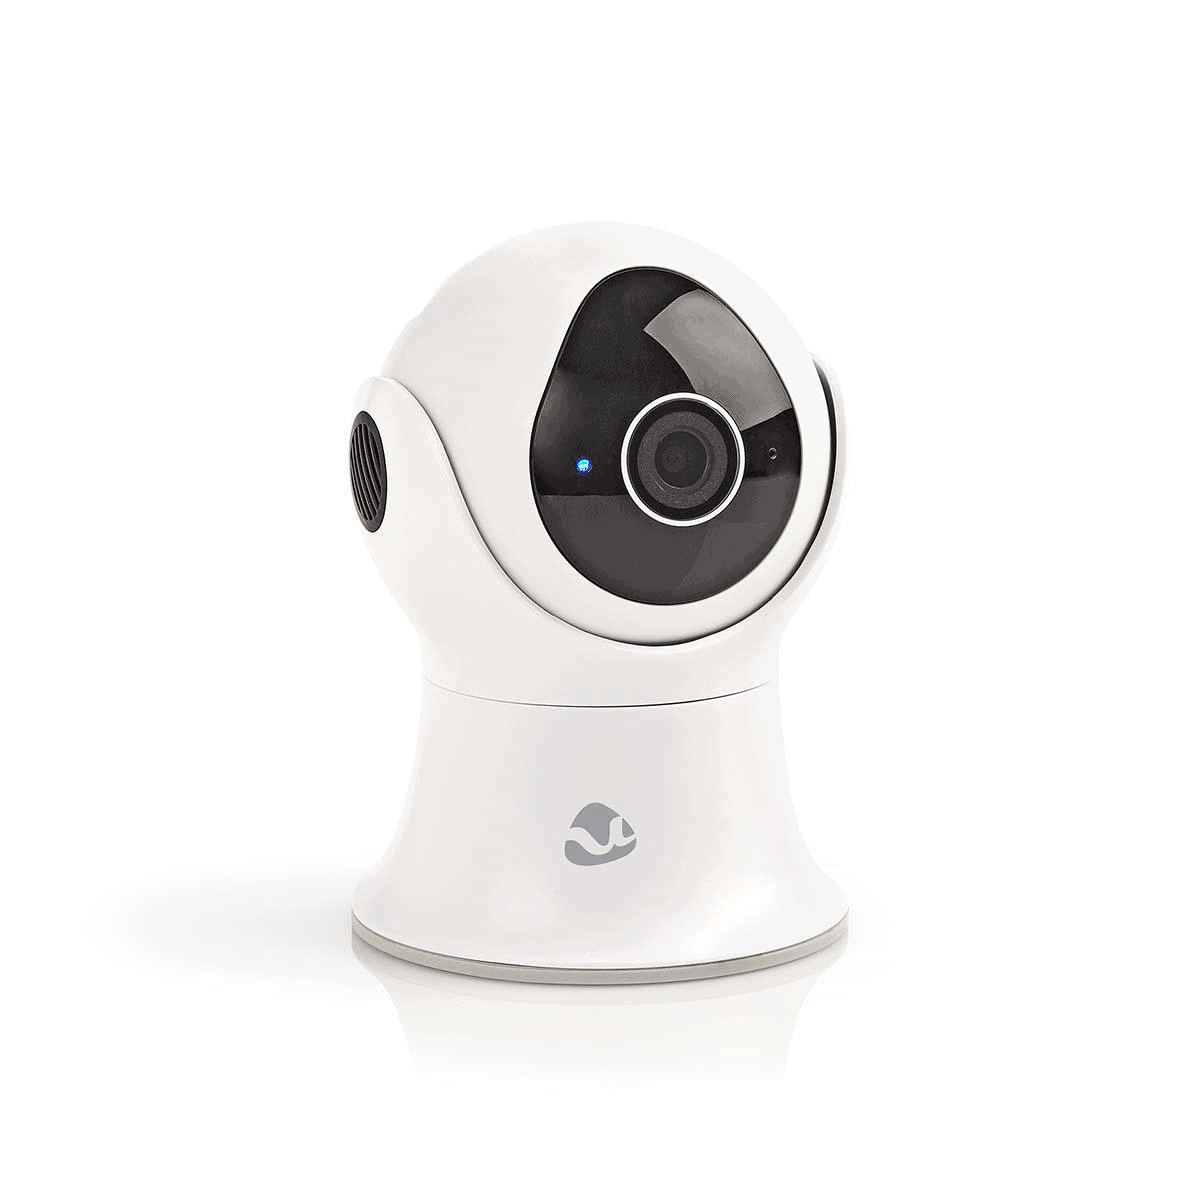 15 Best Wireless Security Camera Rated By Experts 13